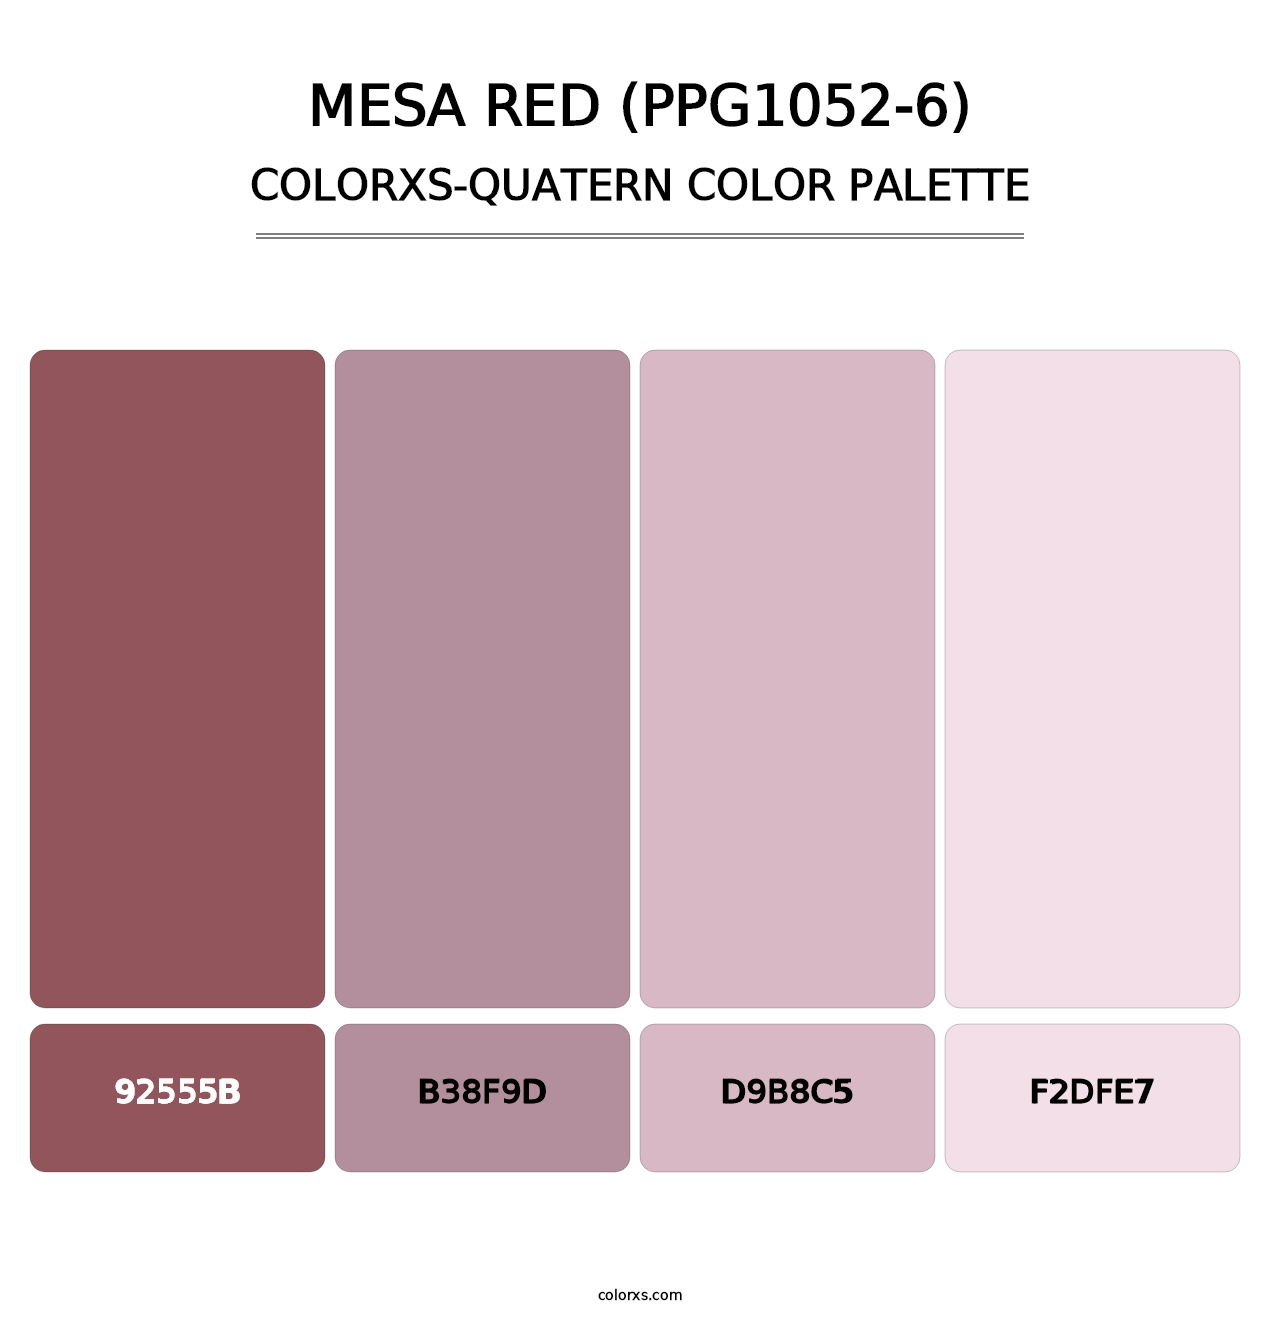 Mesa Red (PPG1052-6) - Colorxs Quatern Palette